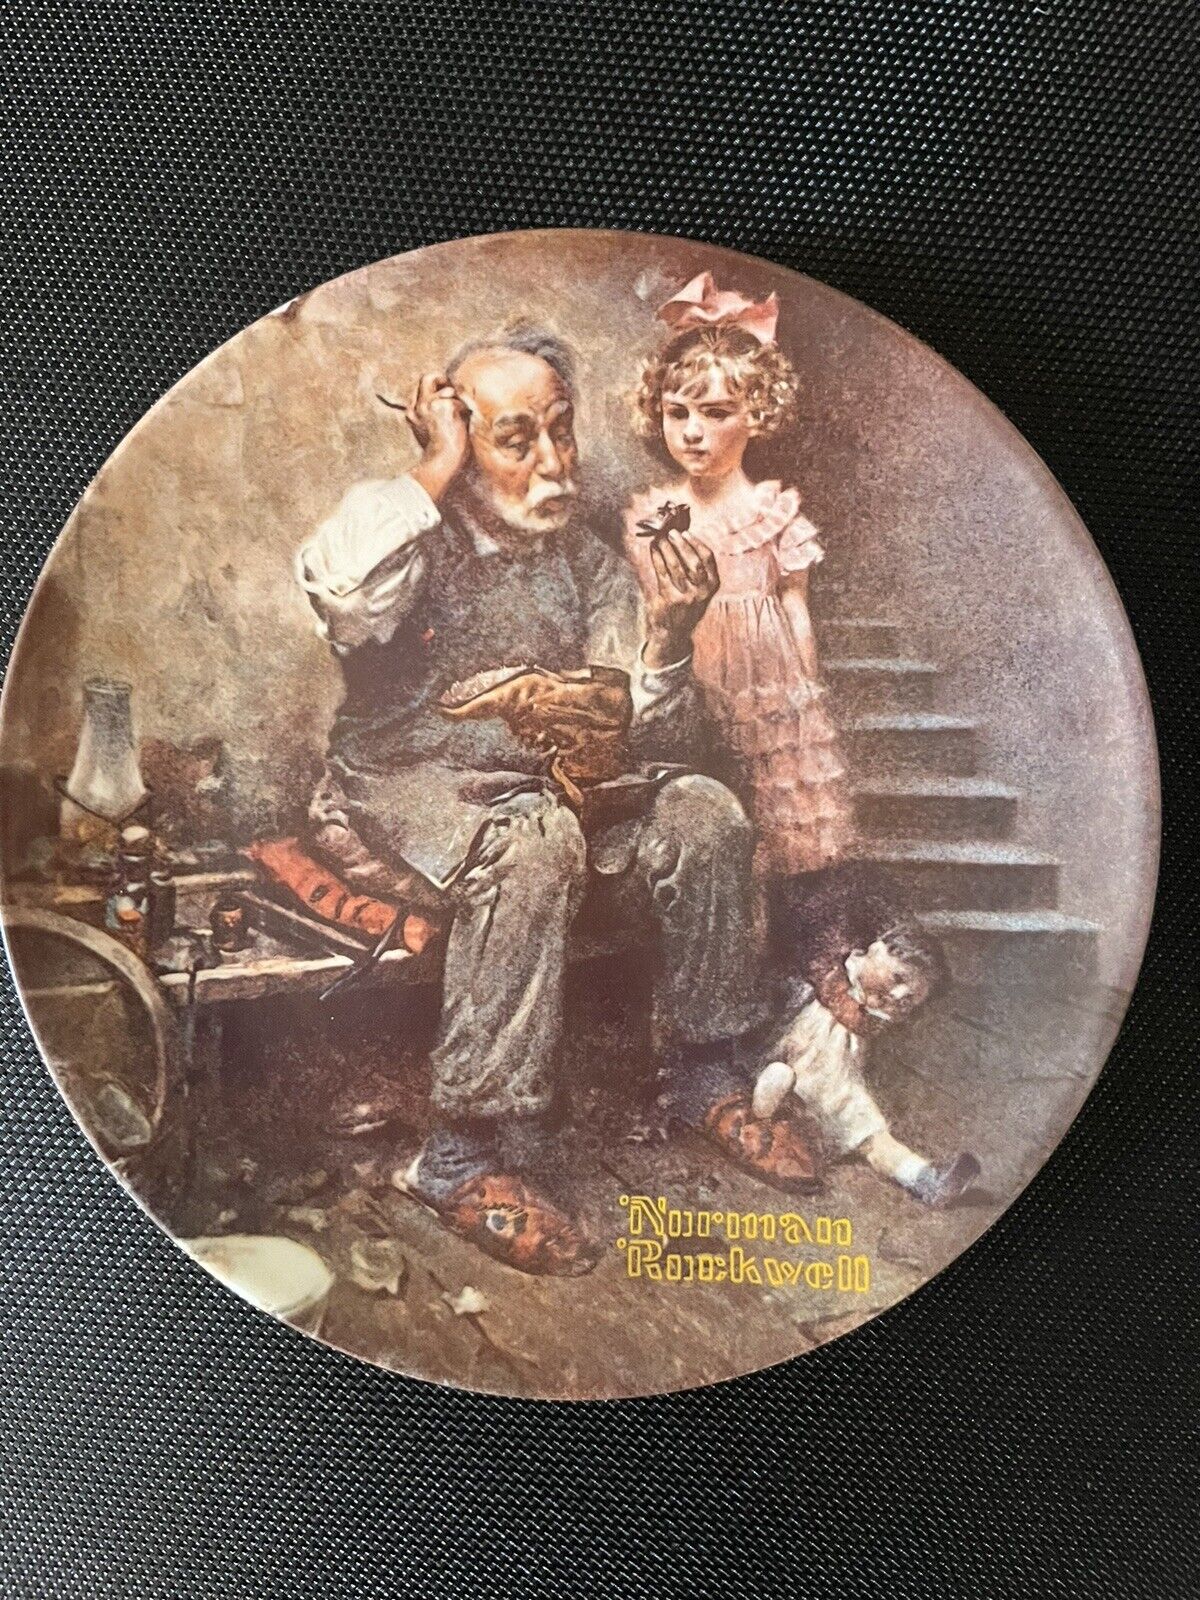 norman rockwell plates Vintage Limited Edition “The Cobbler” Single Plate